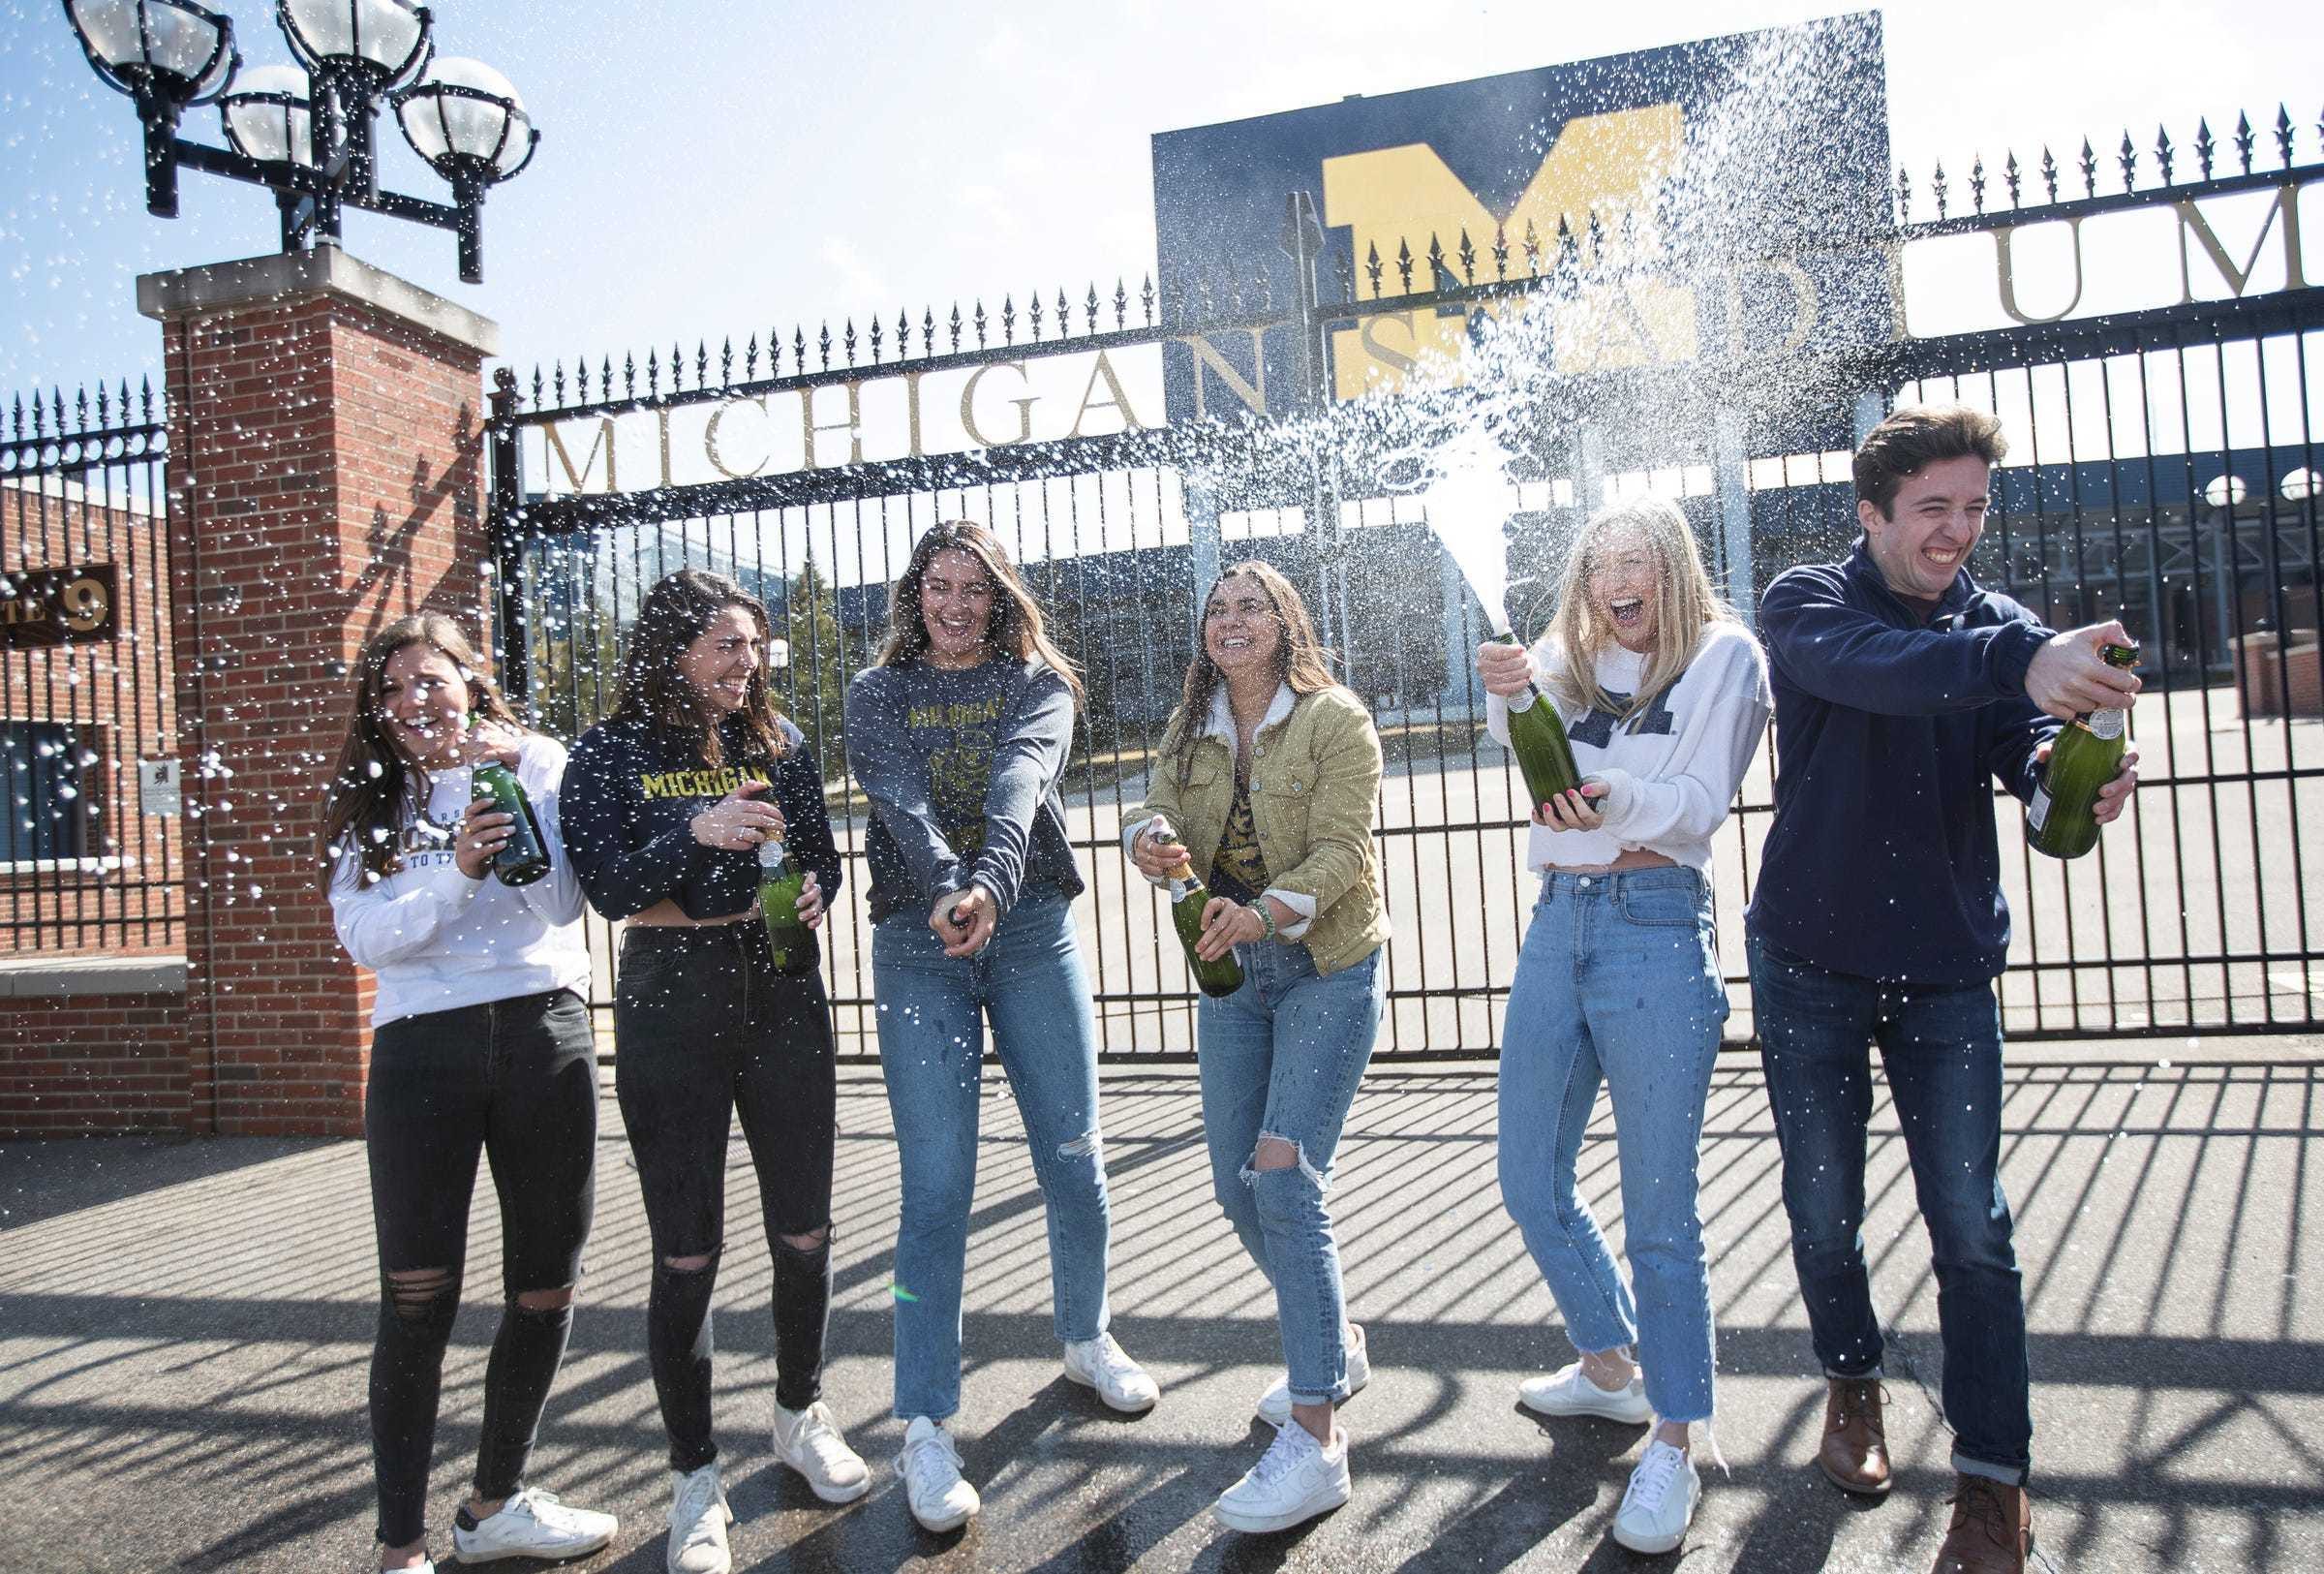 From left, University of Michigan graduating seniors Grace Scarfone, Natalia Engel, Rita Sidhu, Hannah Saunders, Grace Drettmann and Brian Galvin pop bottles of sparkling wine for their graduation photos outside of the Michigan Stadium in Ann Arbor, Tuesday, March 17, 2020. Students weren't given their traditional graduation due to the pandemic.